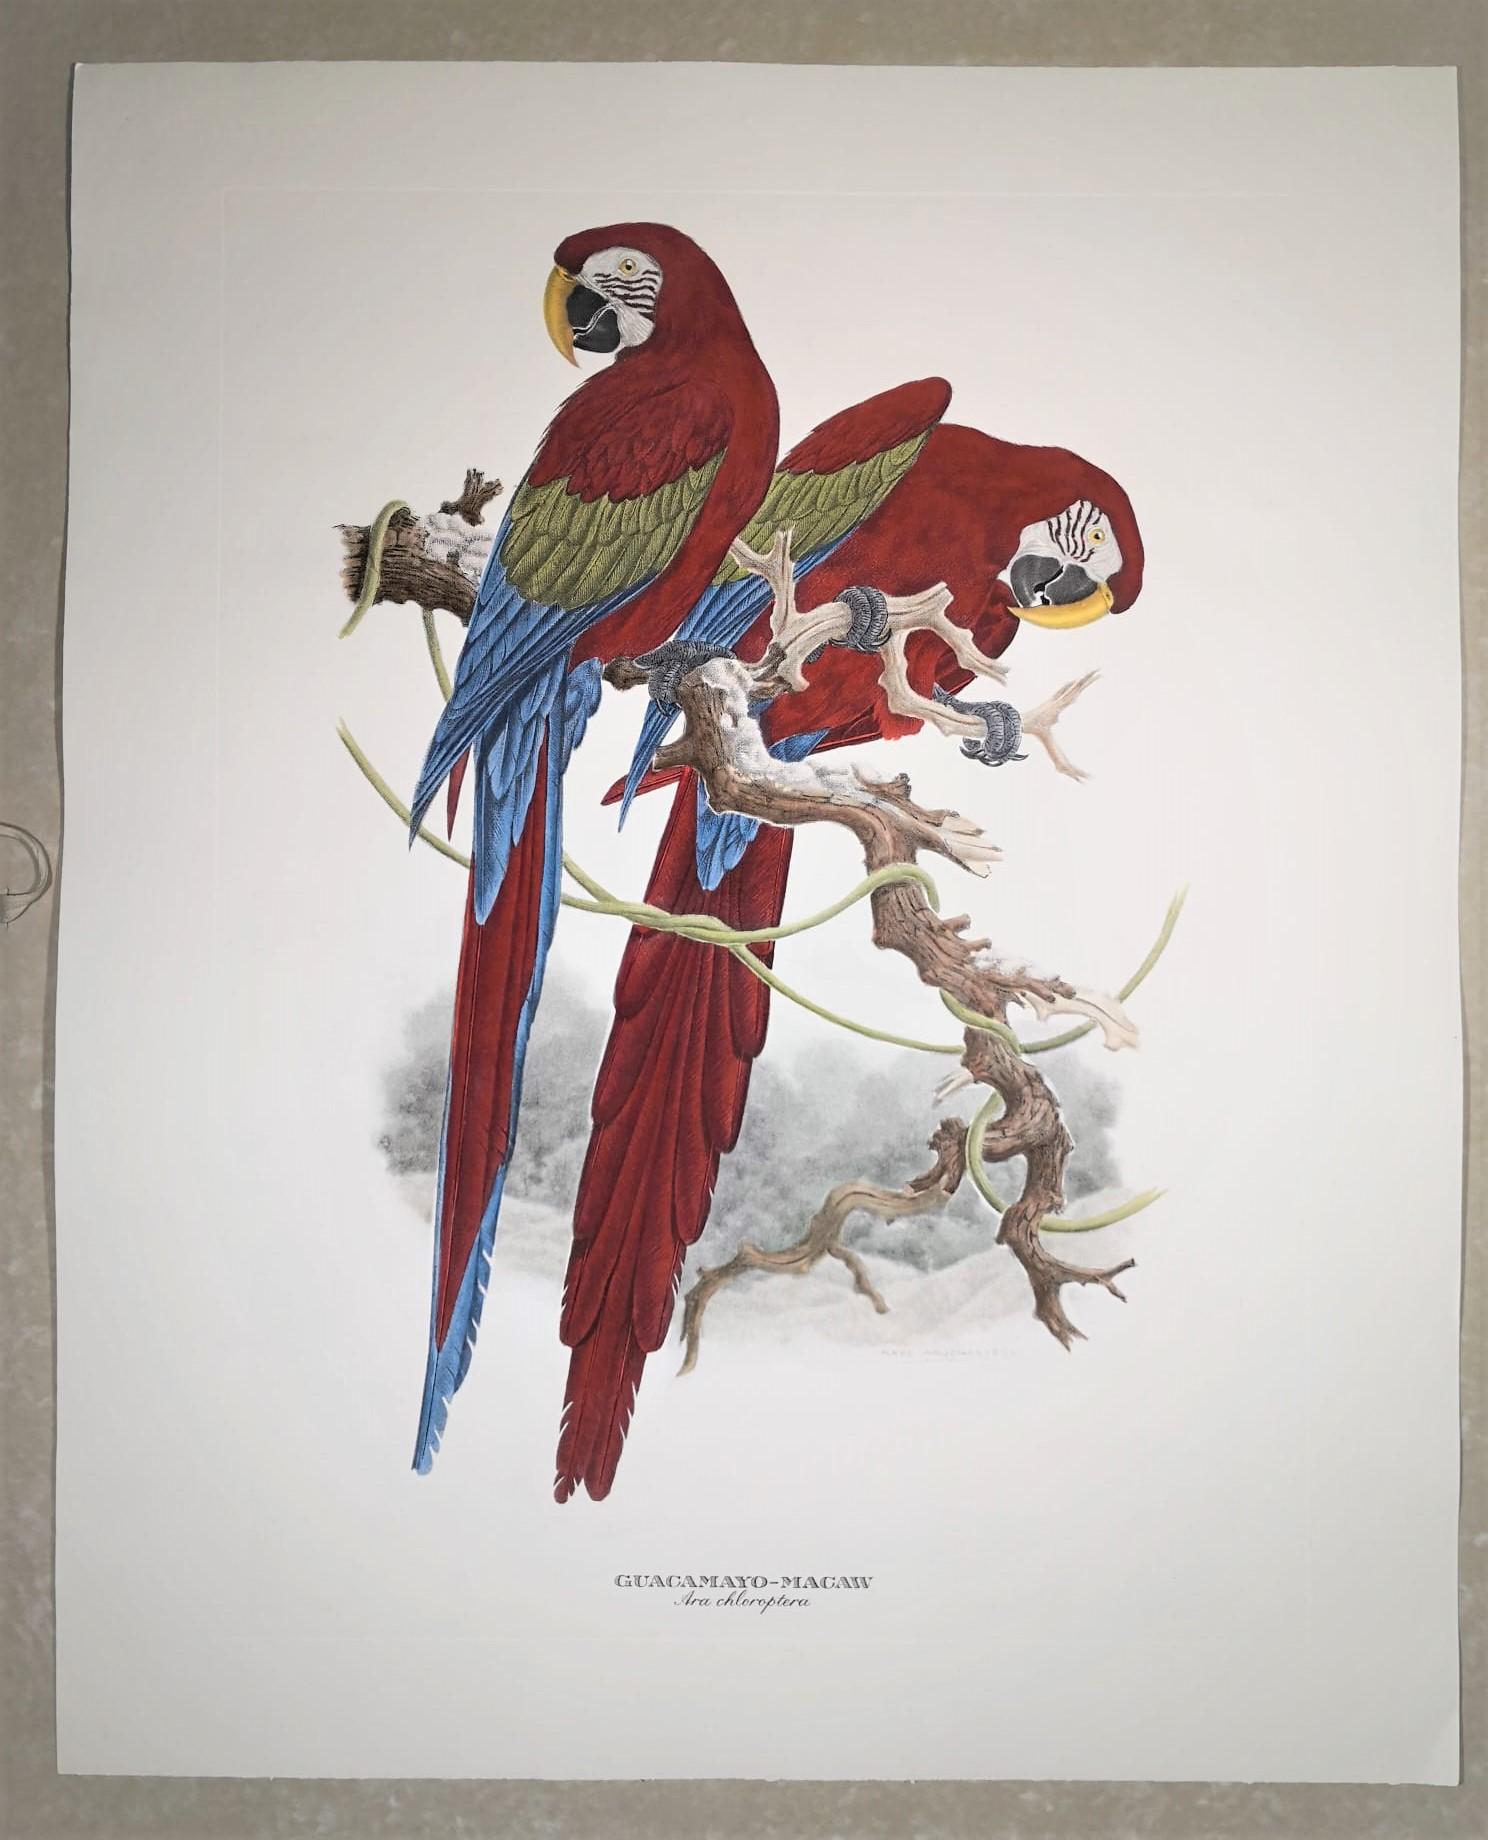 Elegant hand-watercoloured print representing two South American Macaws Ara Chloraptera in blue nuance. Image reproduced from the famous illustrations by Axel Amuchastegui.
Printed manually on 100% cotton engraving paper in Florence Italy.
Each